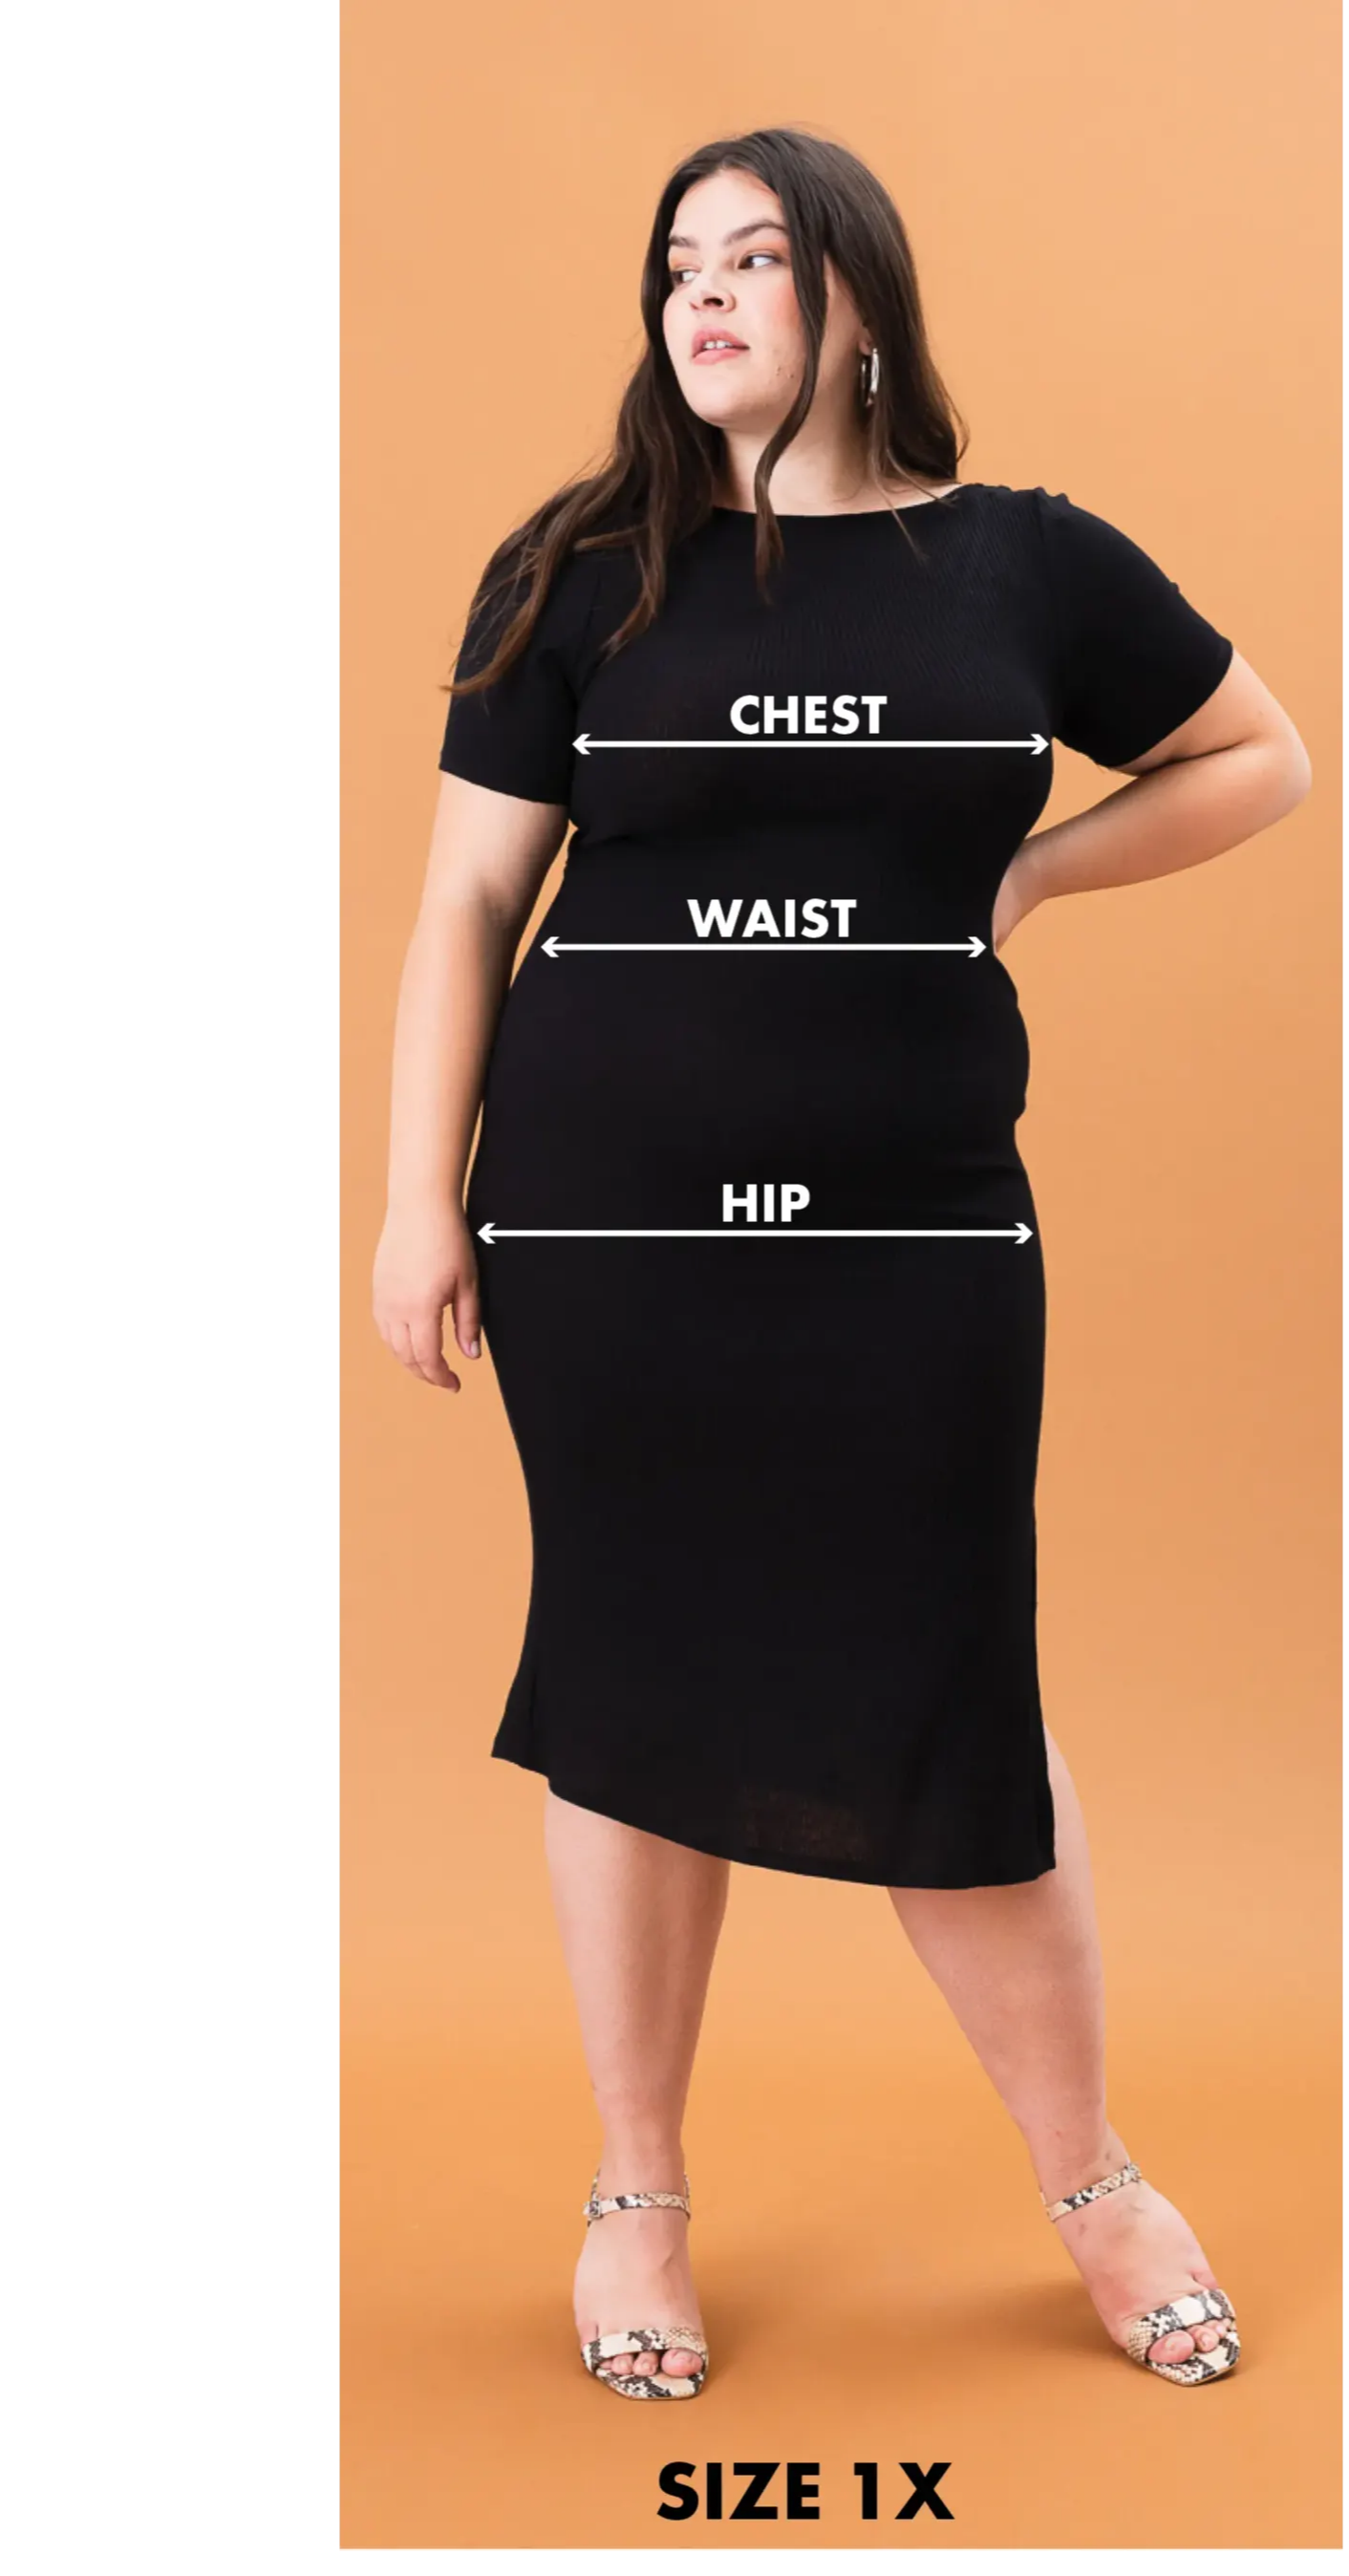 Trixxi junior plus size image of 1X girl with area measurement guides at the bust, waist, and hip.